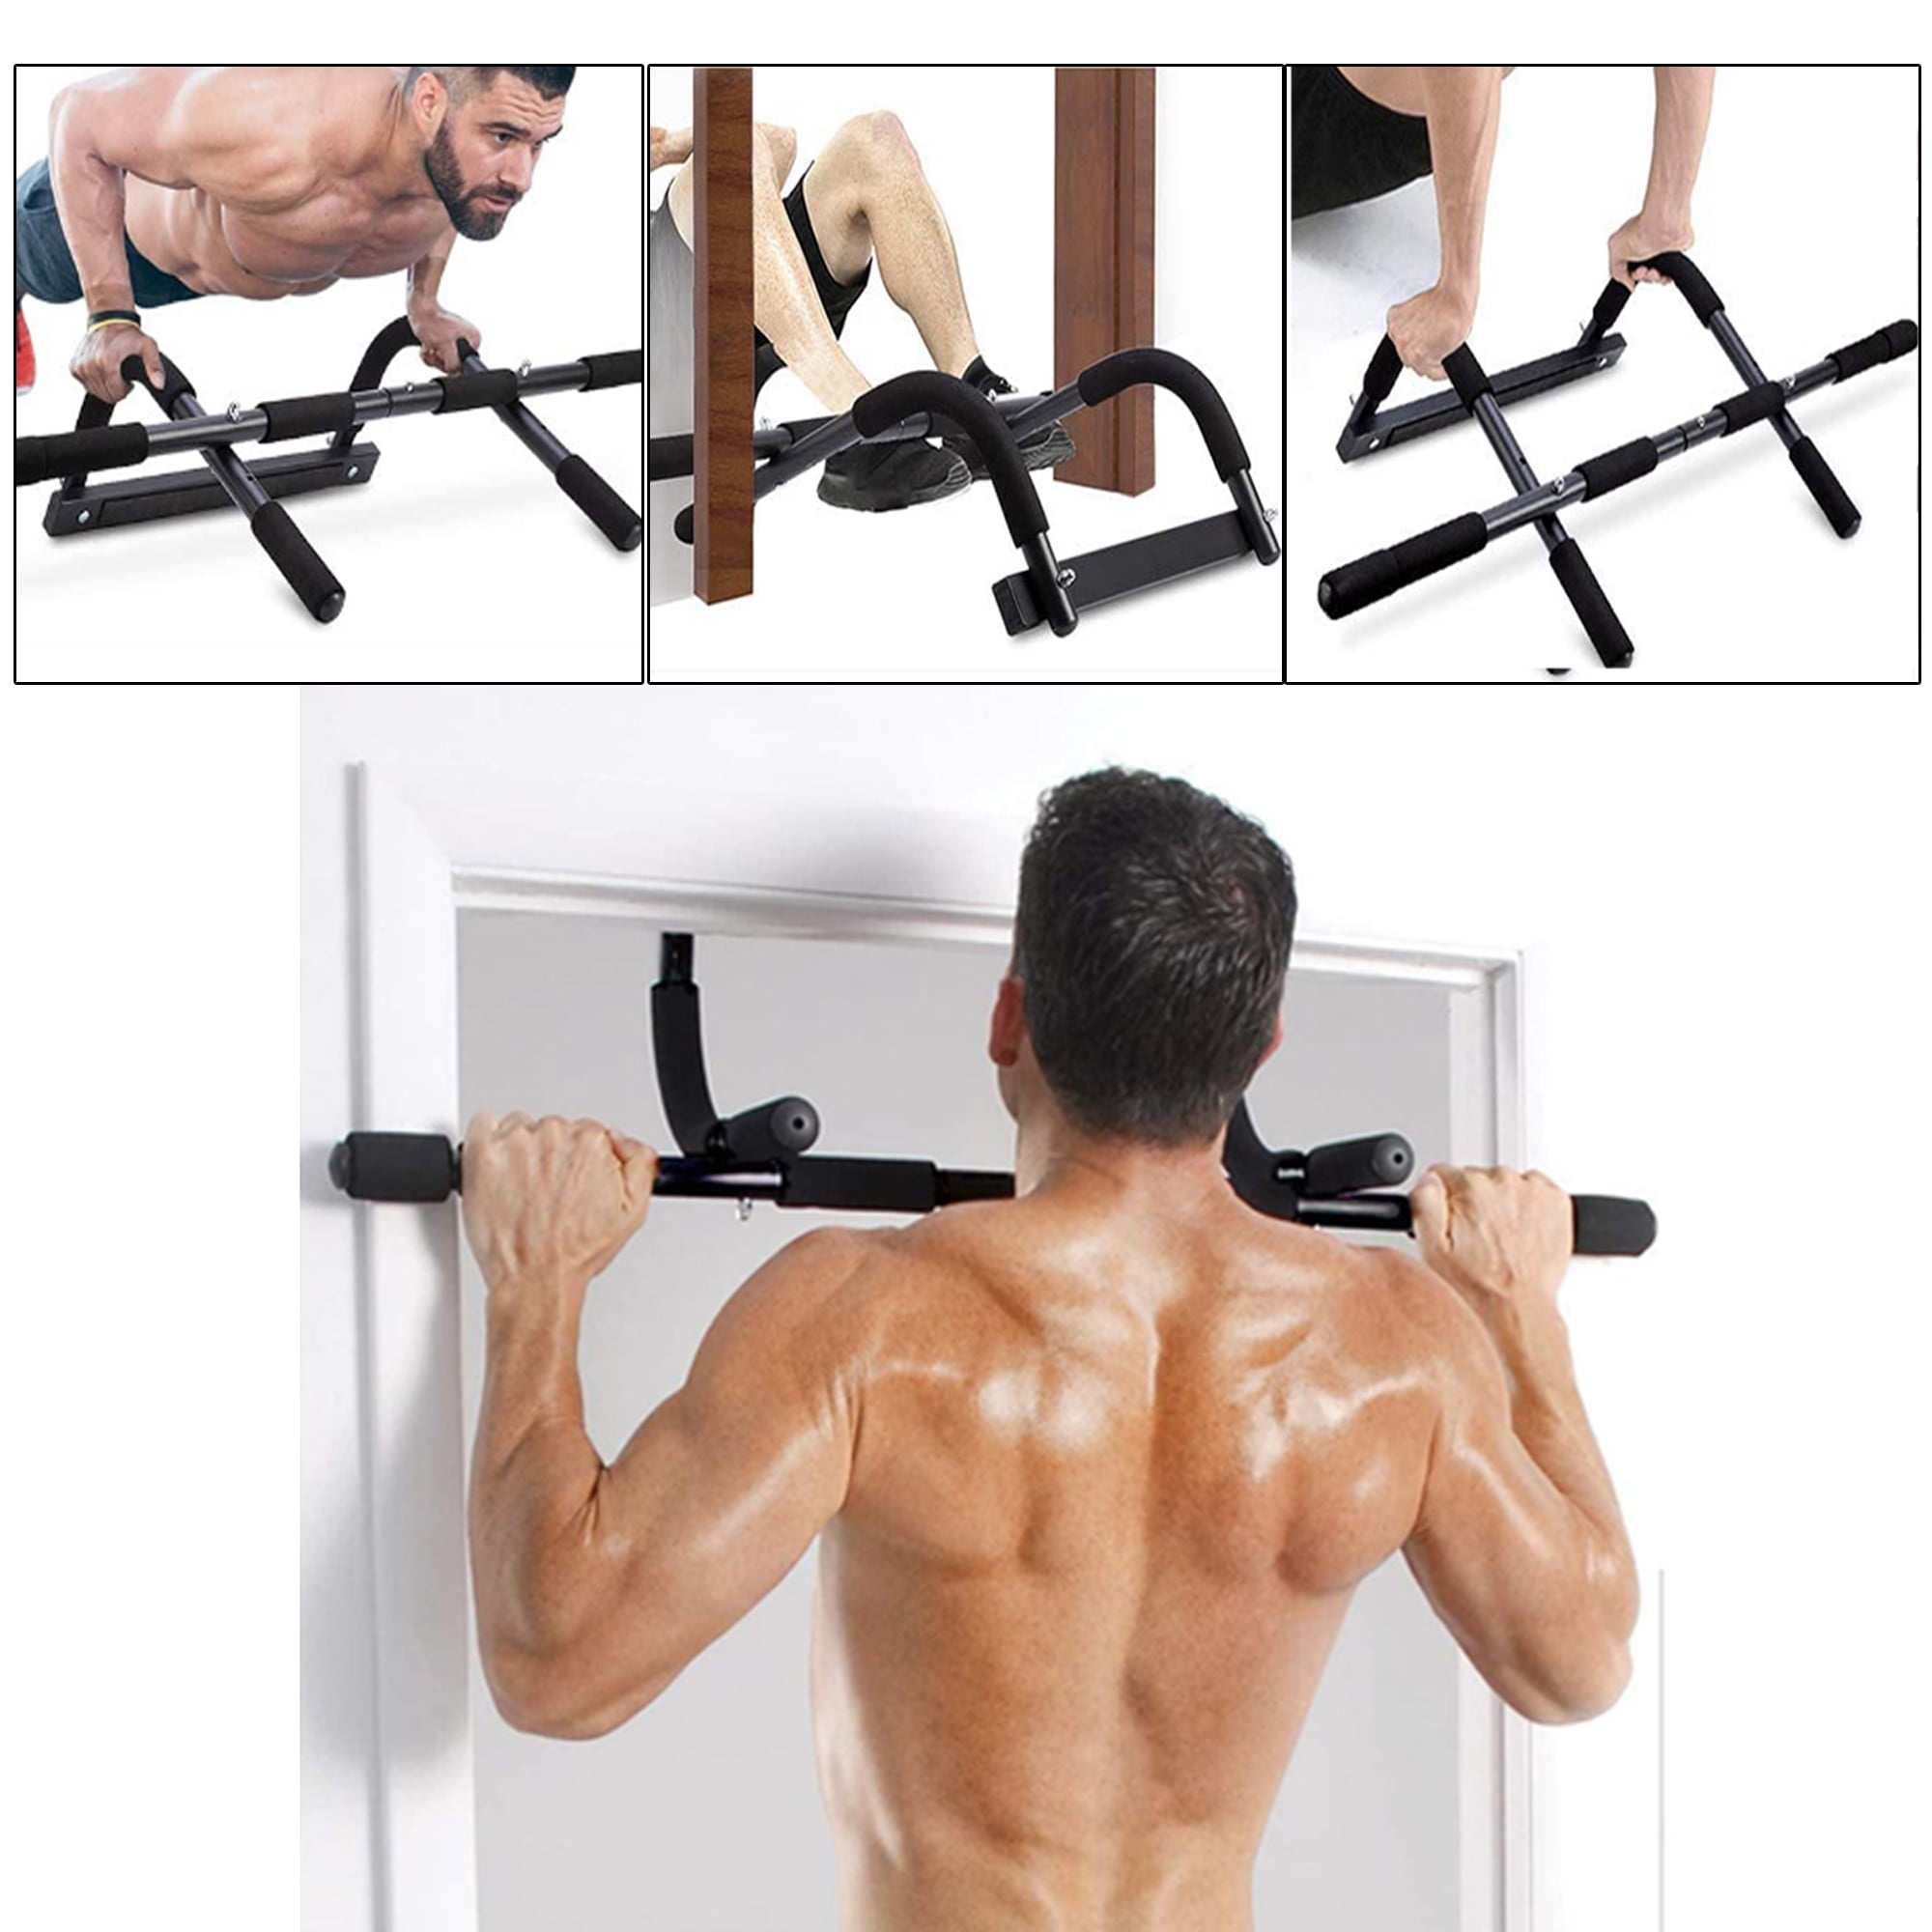 Upper Body Trainer On The Doorway Wall Indoor Home Gym Exercise Equipment Without Screw for Body Workout DRB DRIBBLING Fitness Doorway Pull Up Bar Multi-Purpose Portable Horizontal Chin Up Bar